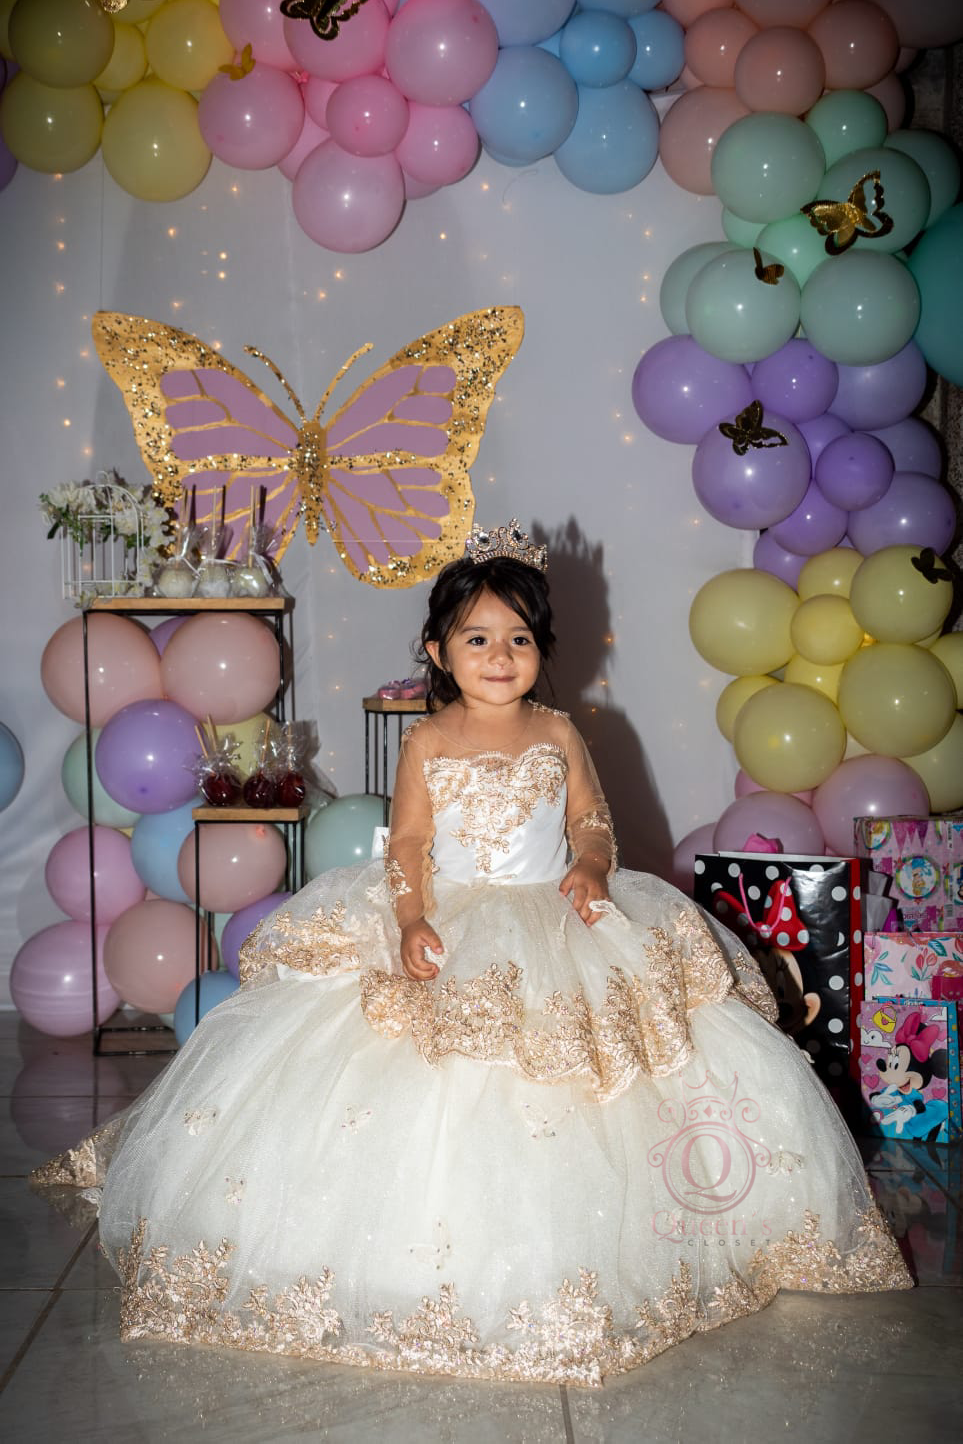 Stella Removable 2 Pieces with Butterflies Package (Dress, Petticoat, Bouquet, Crown)